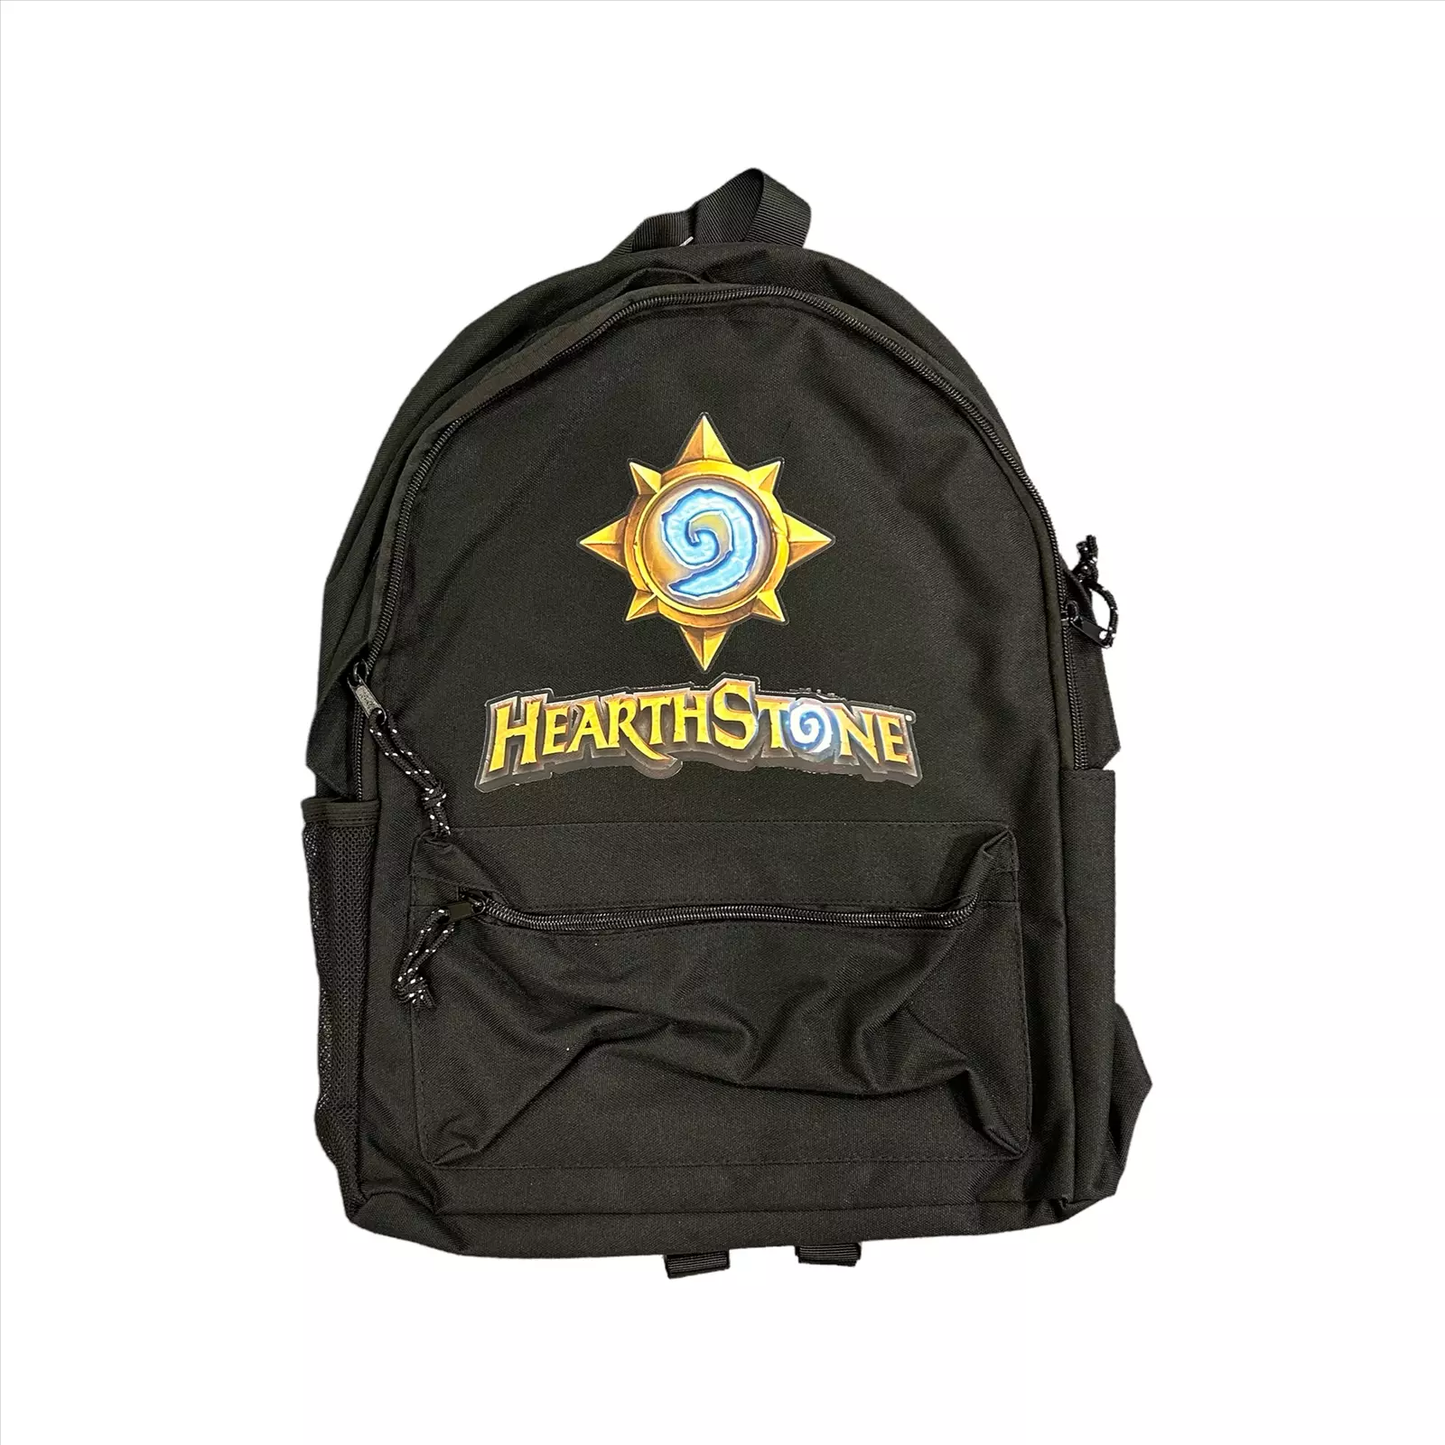 12x Hearthstone Backpacks RRP £25 Only £4.00 each